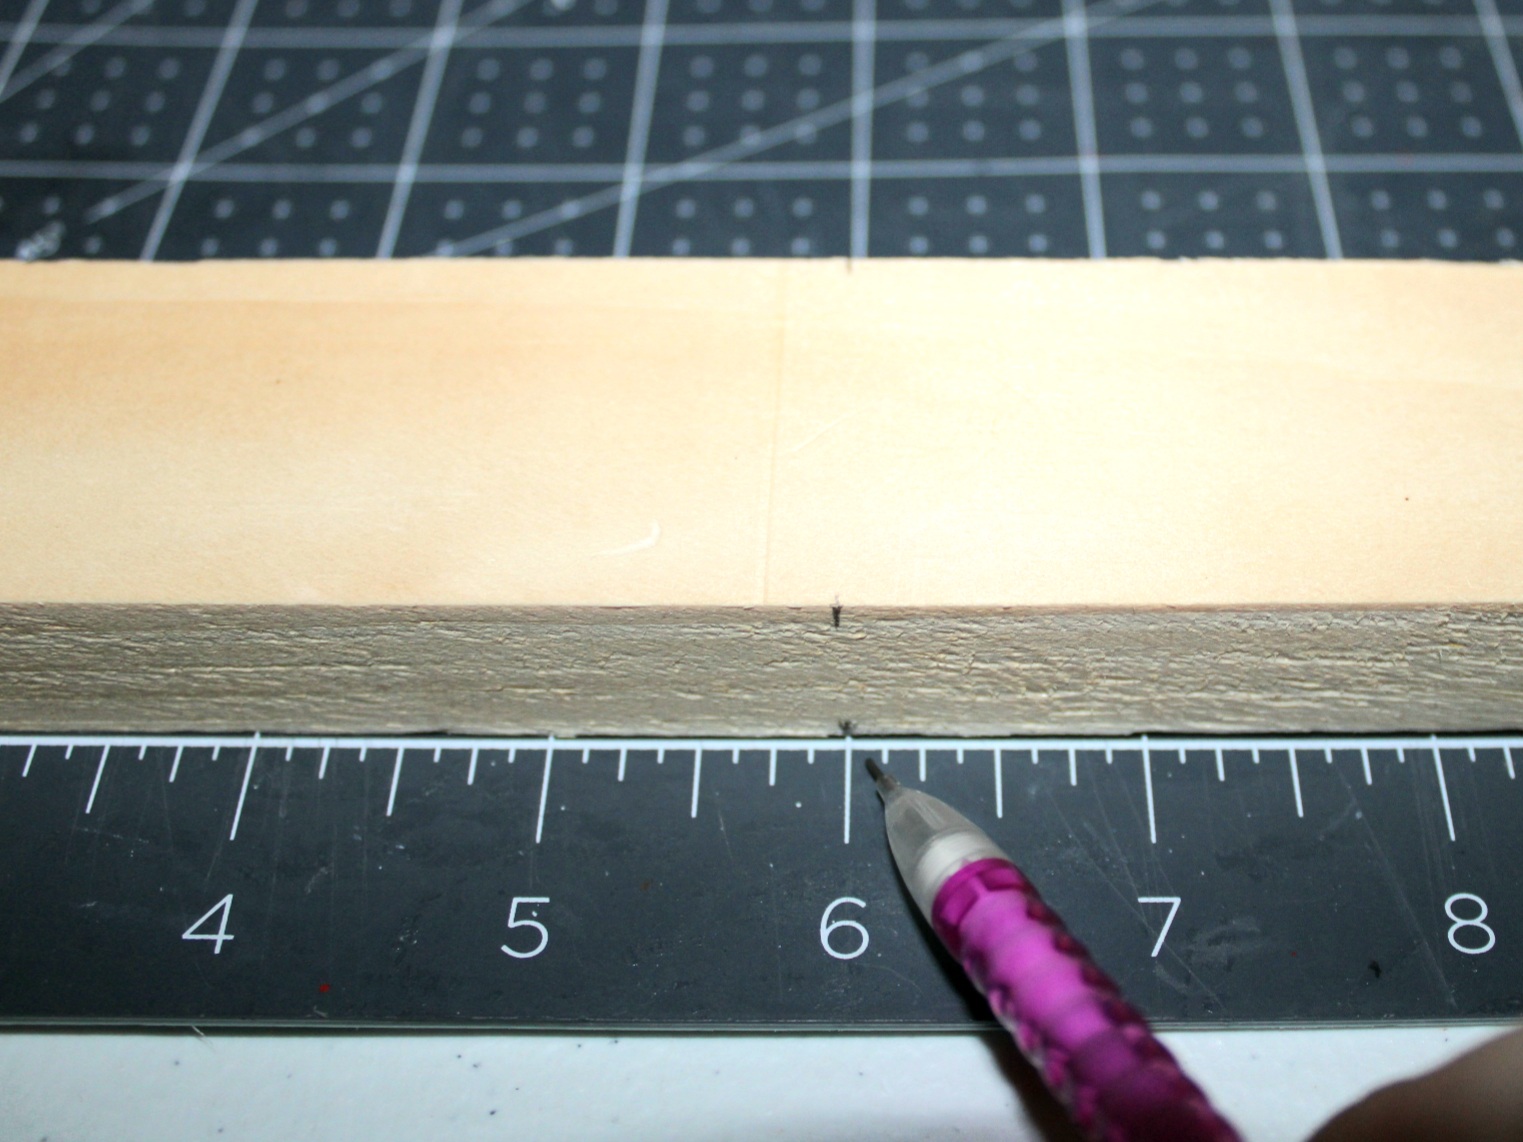 Marking a 12" piece of wood at the 6" mark to cut it to be a step on the DIY tea towel ladder.